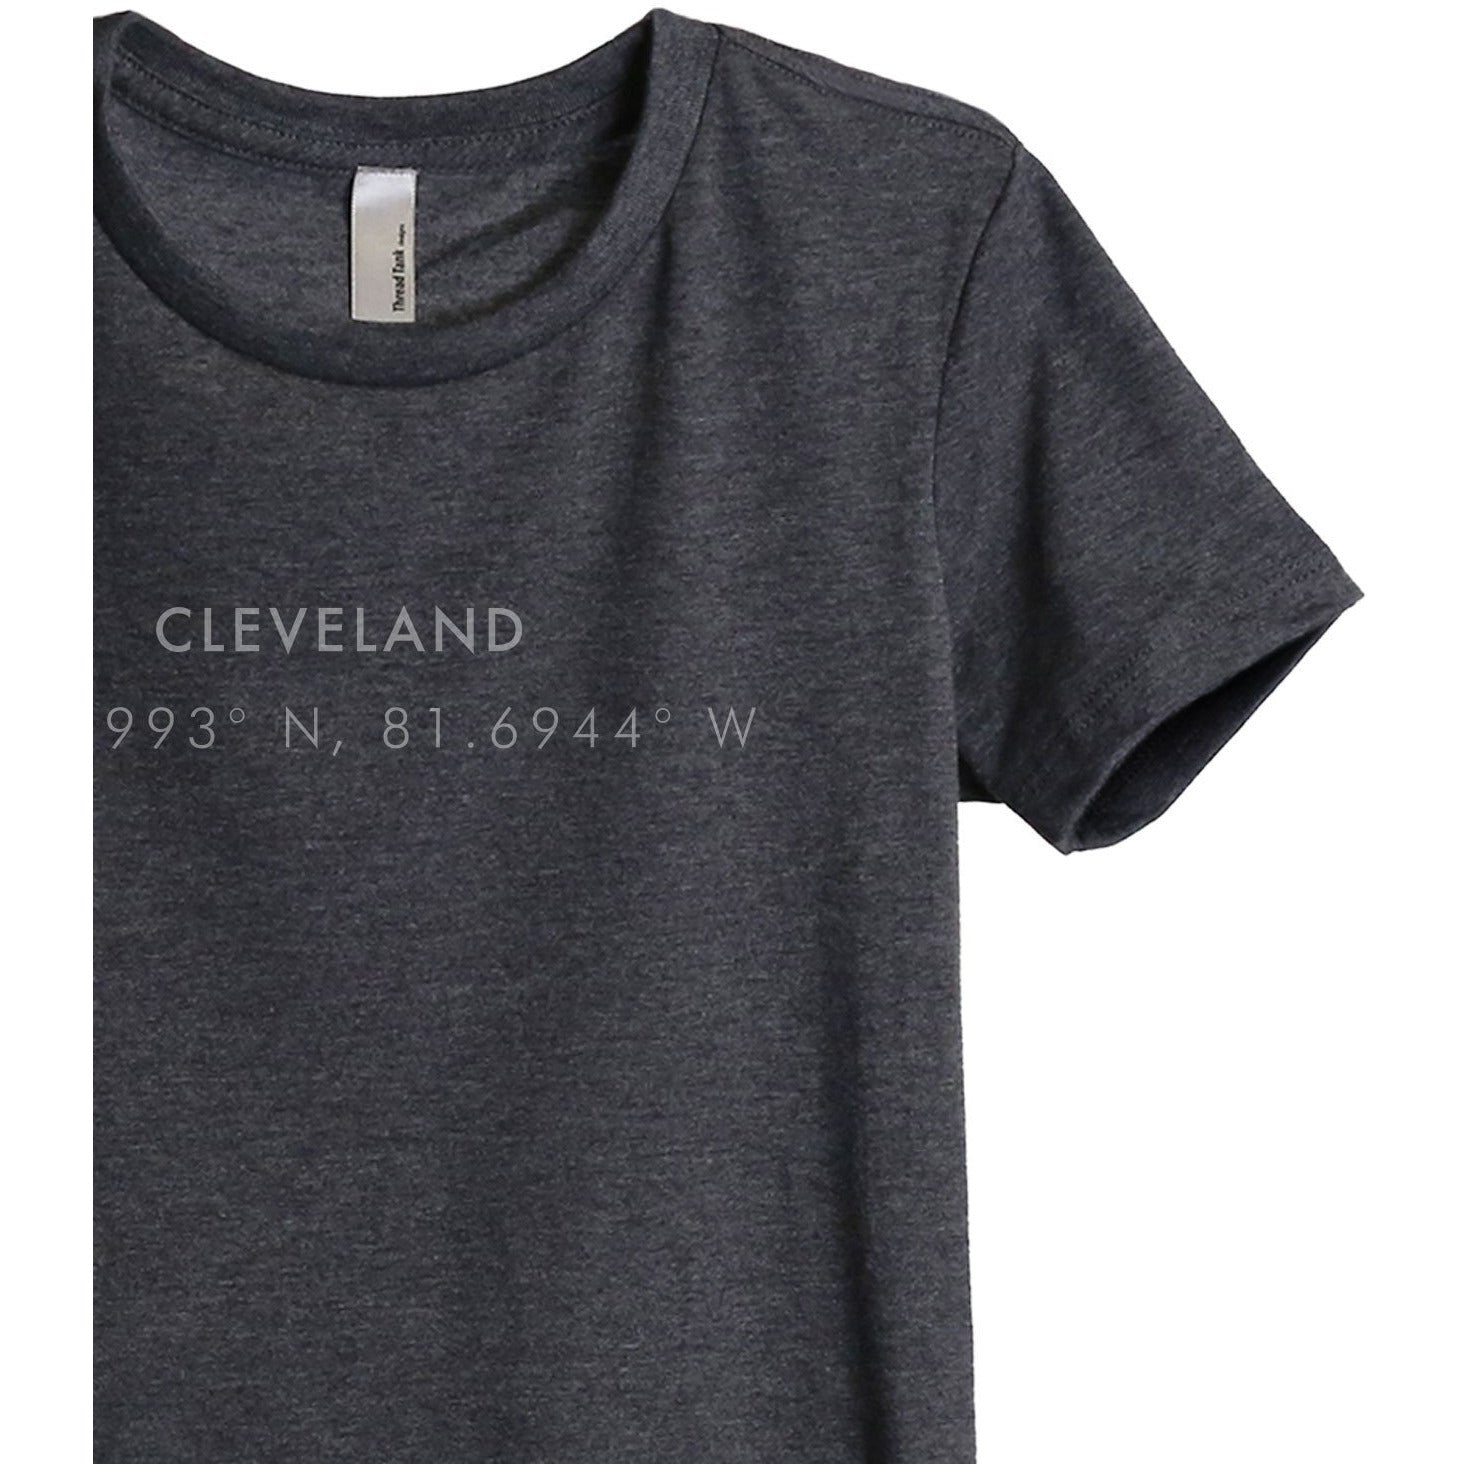 Cleveland Ohio Coordinates Women's Relaxed Crewneck T-Shirt Top Tee Charcoal Grey Zoom Details